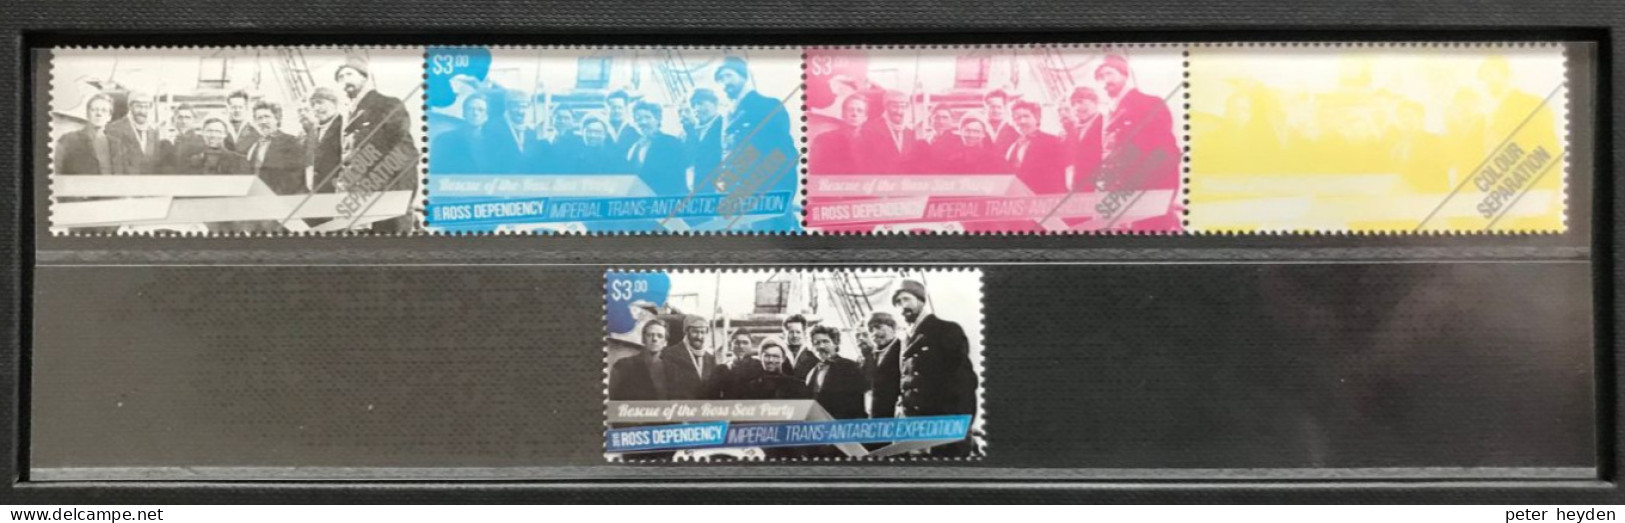 ROSS 2015 ~ DeLuxe Set With MNH ** Special Block, Se-tenant Block Of 6, Color Seperation Strip, FDC Etc. - Unused Stamps